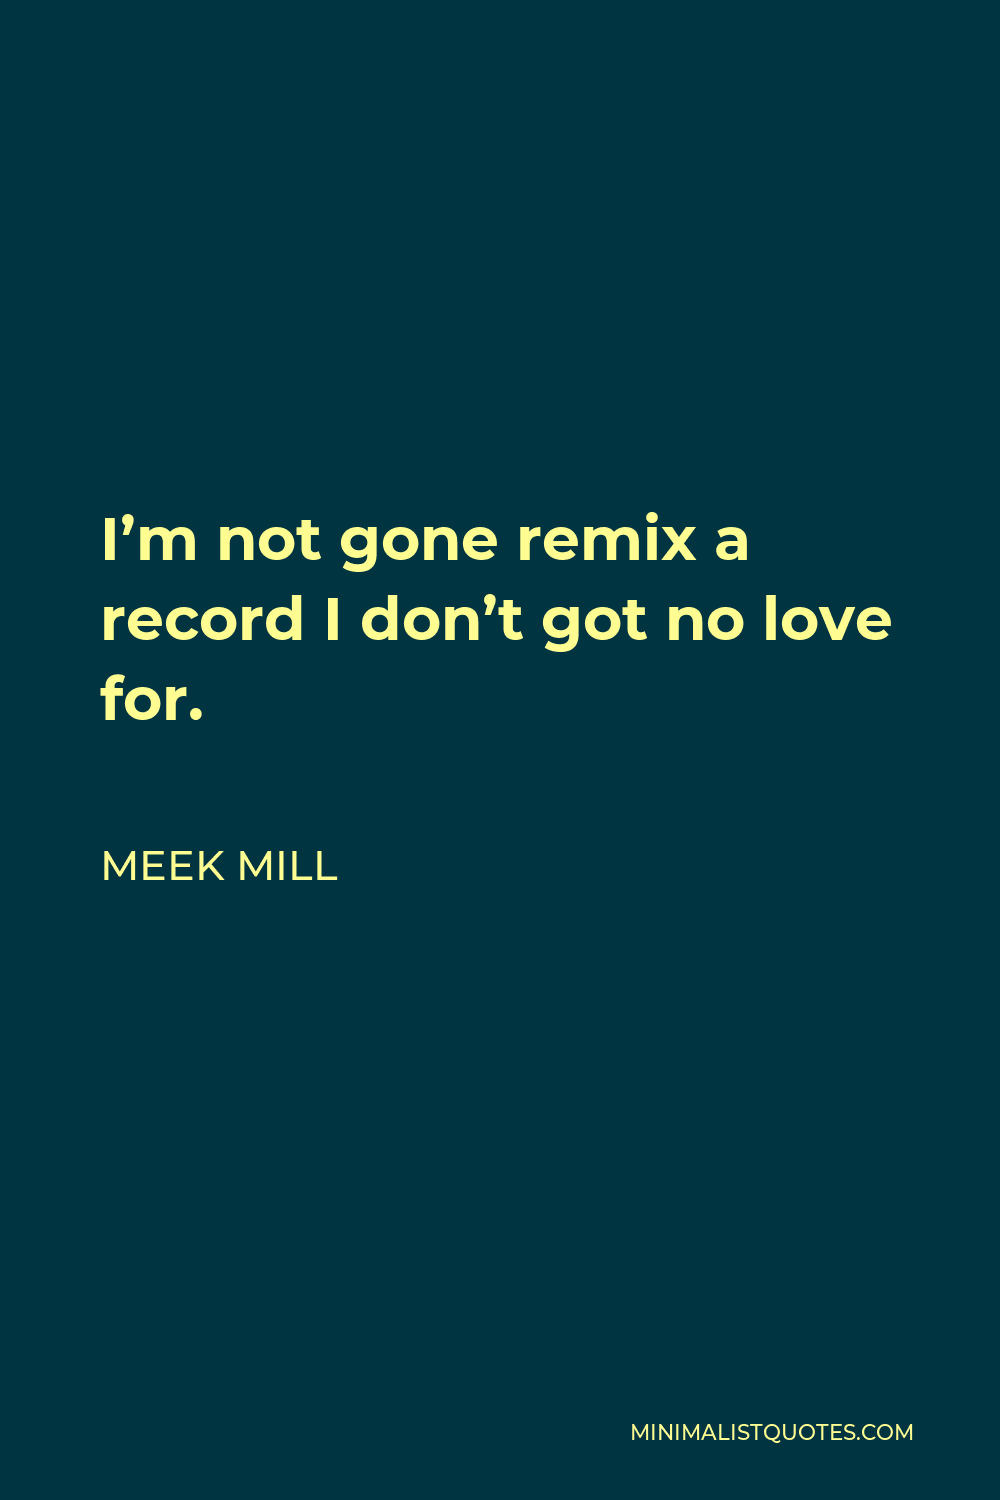 Meek Mill Quote - I’m not gone remix a record I don’t got no love for.